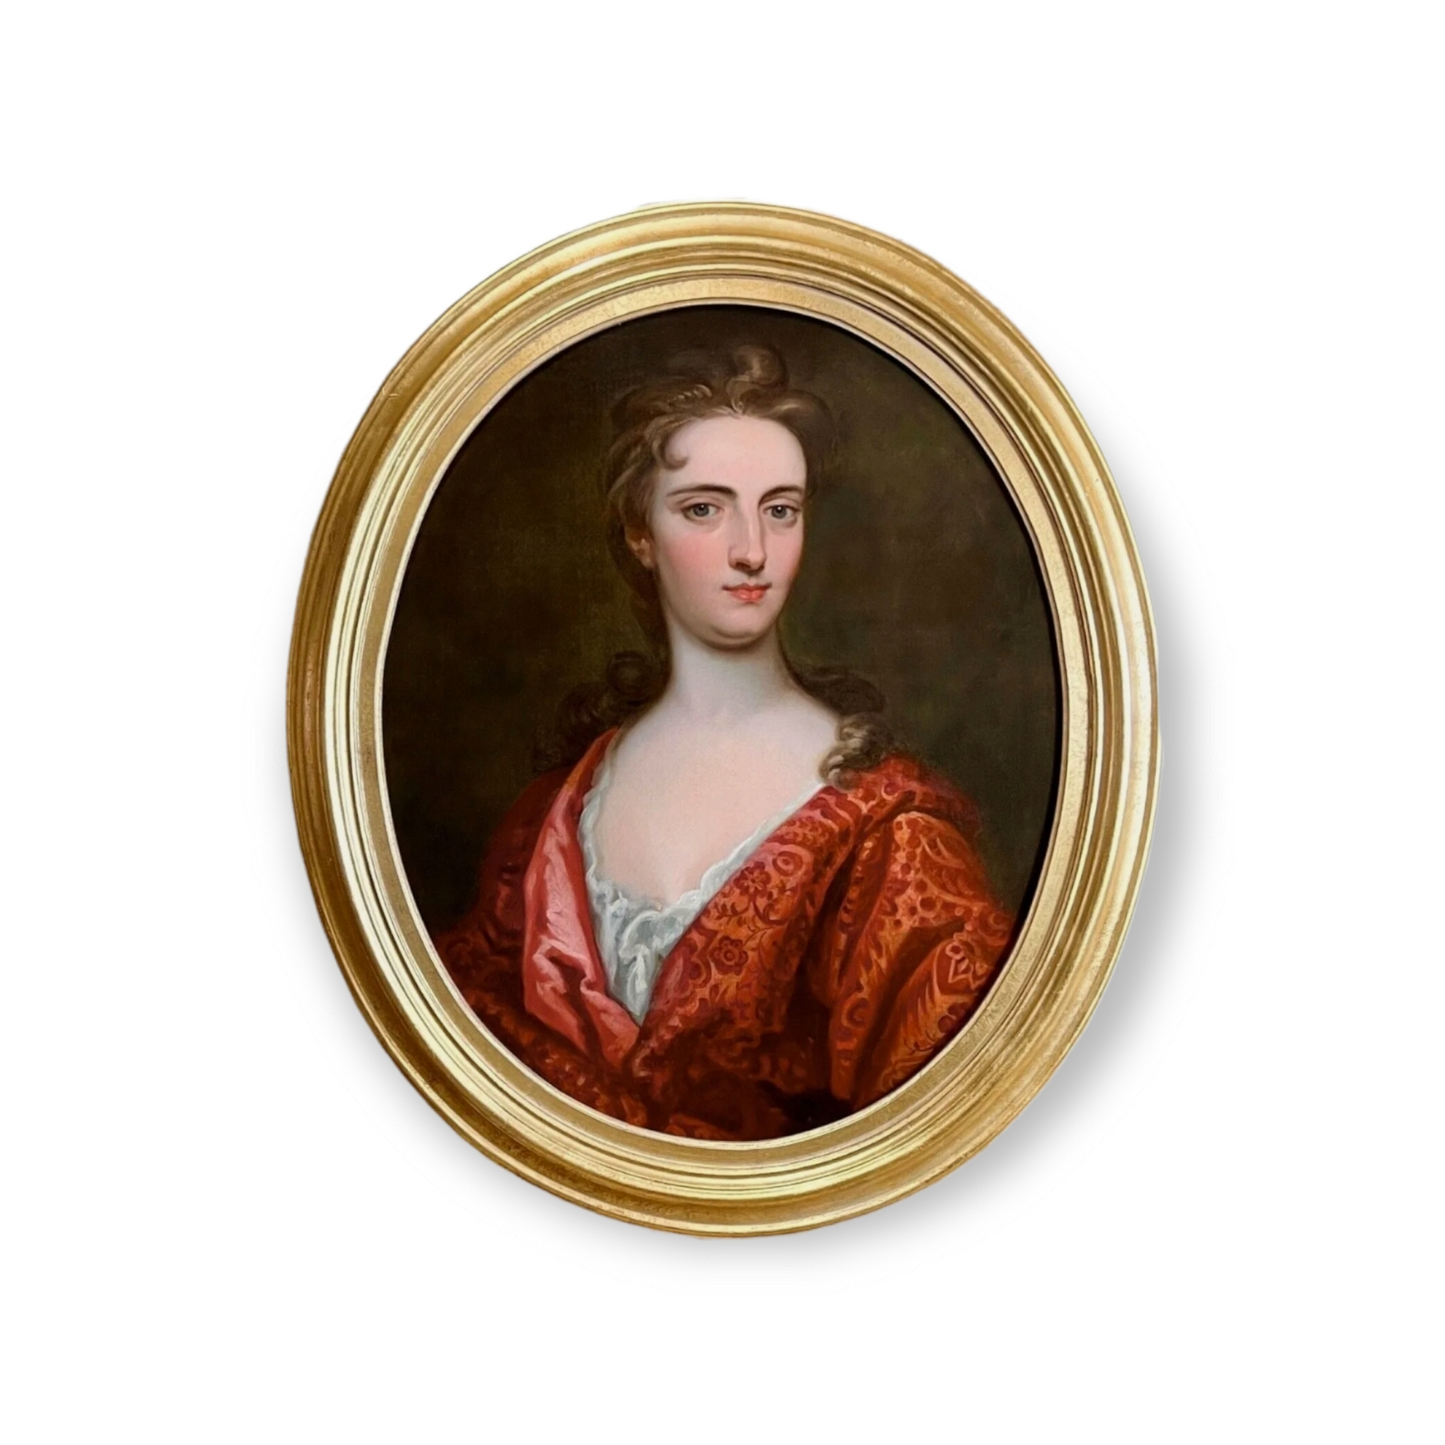 Follower of Sir Godfrey Kneller (1646-1723) - Late 17th Century / Early 18th Century English School Antique Oil on Canvas Portrait of a Lady